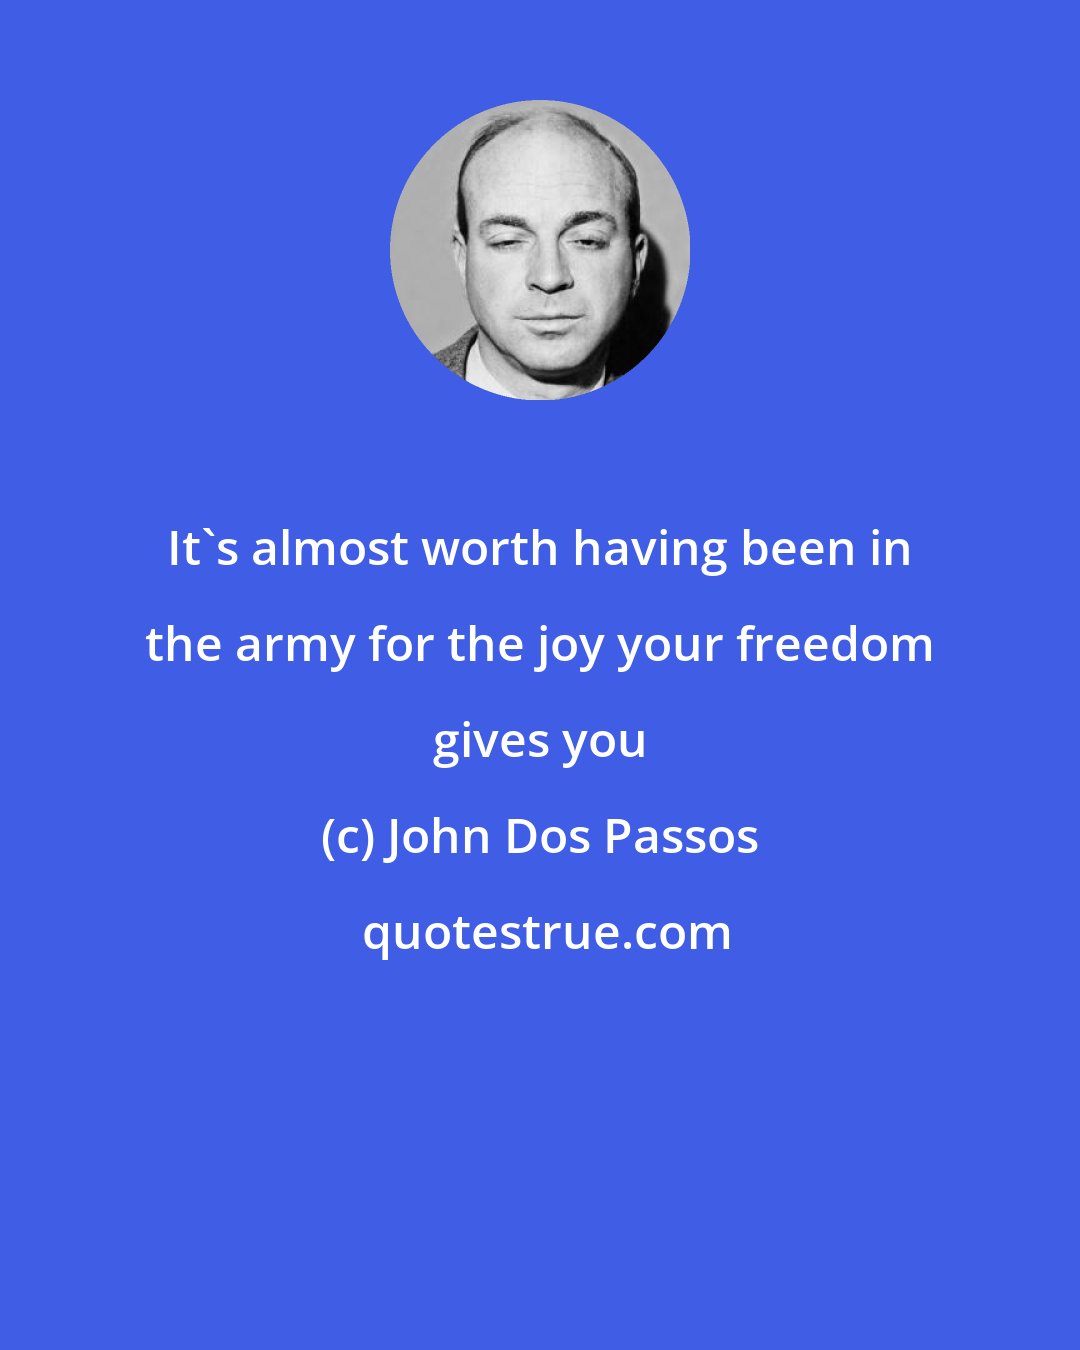 John Dos Passos: It's almost worth having been in the army for the joy your freedom gives you